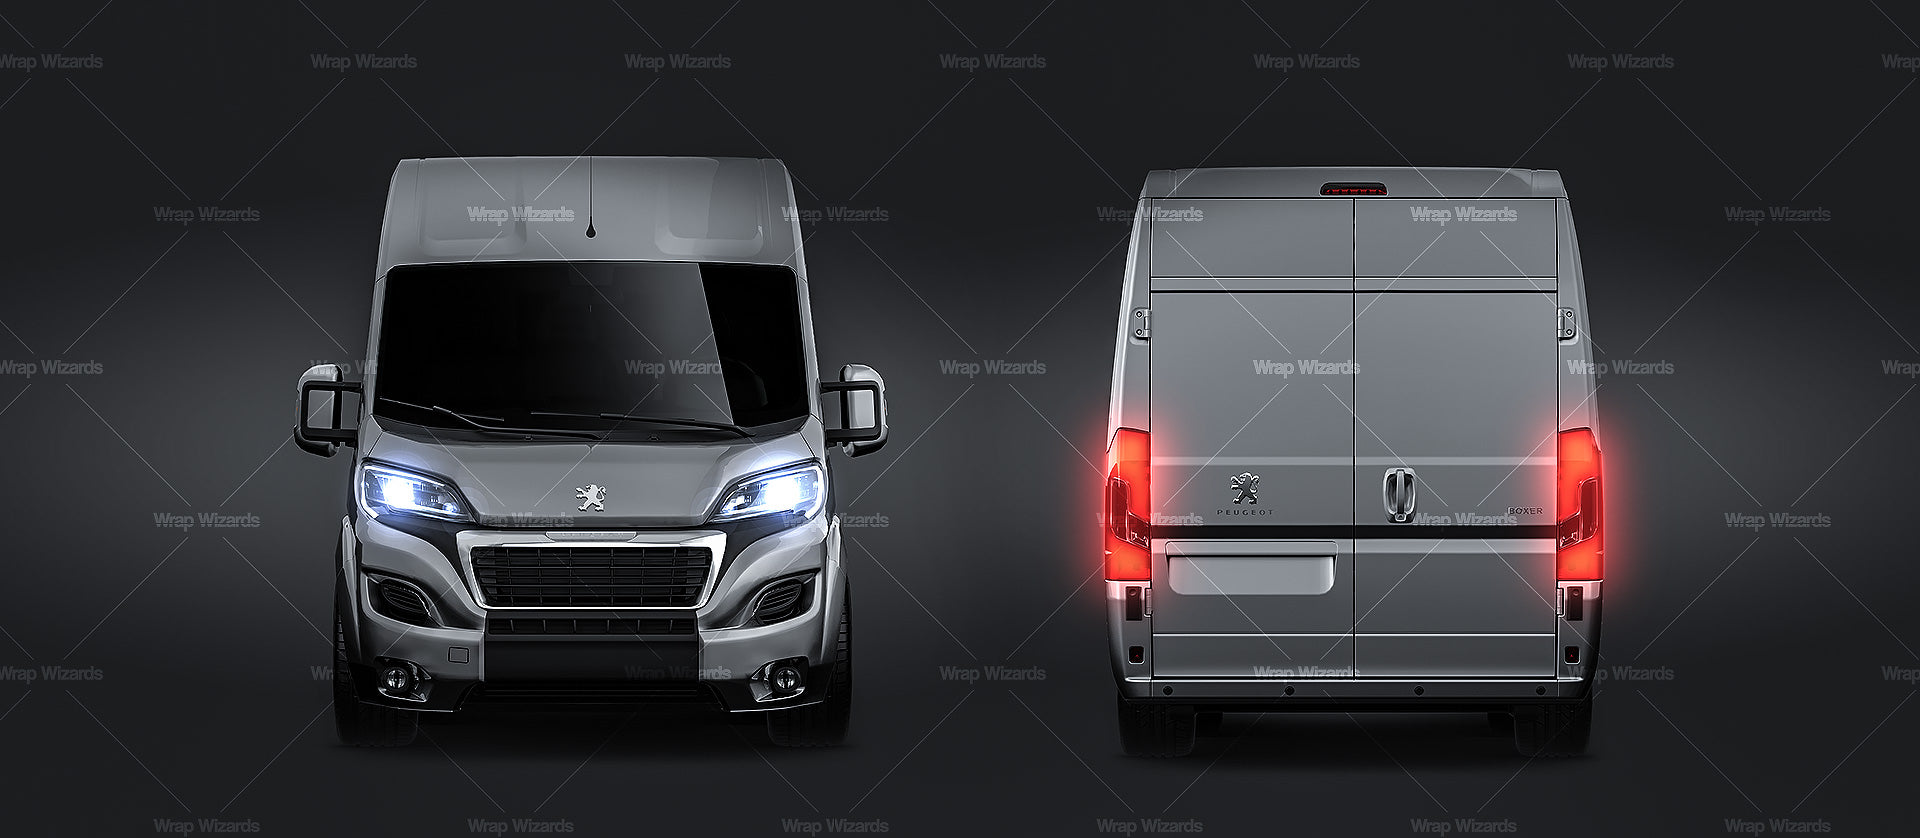 Peugeot Boxer L3H2 glossy finish - all sides Car Mockup Template.psd